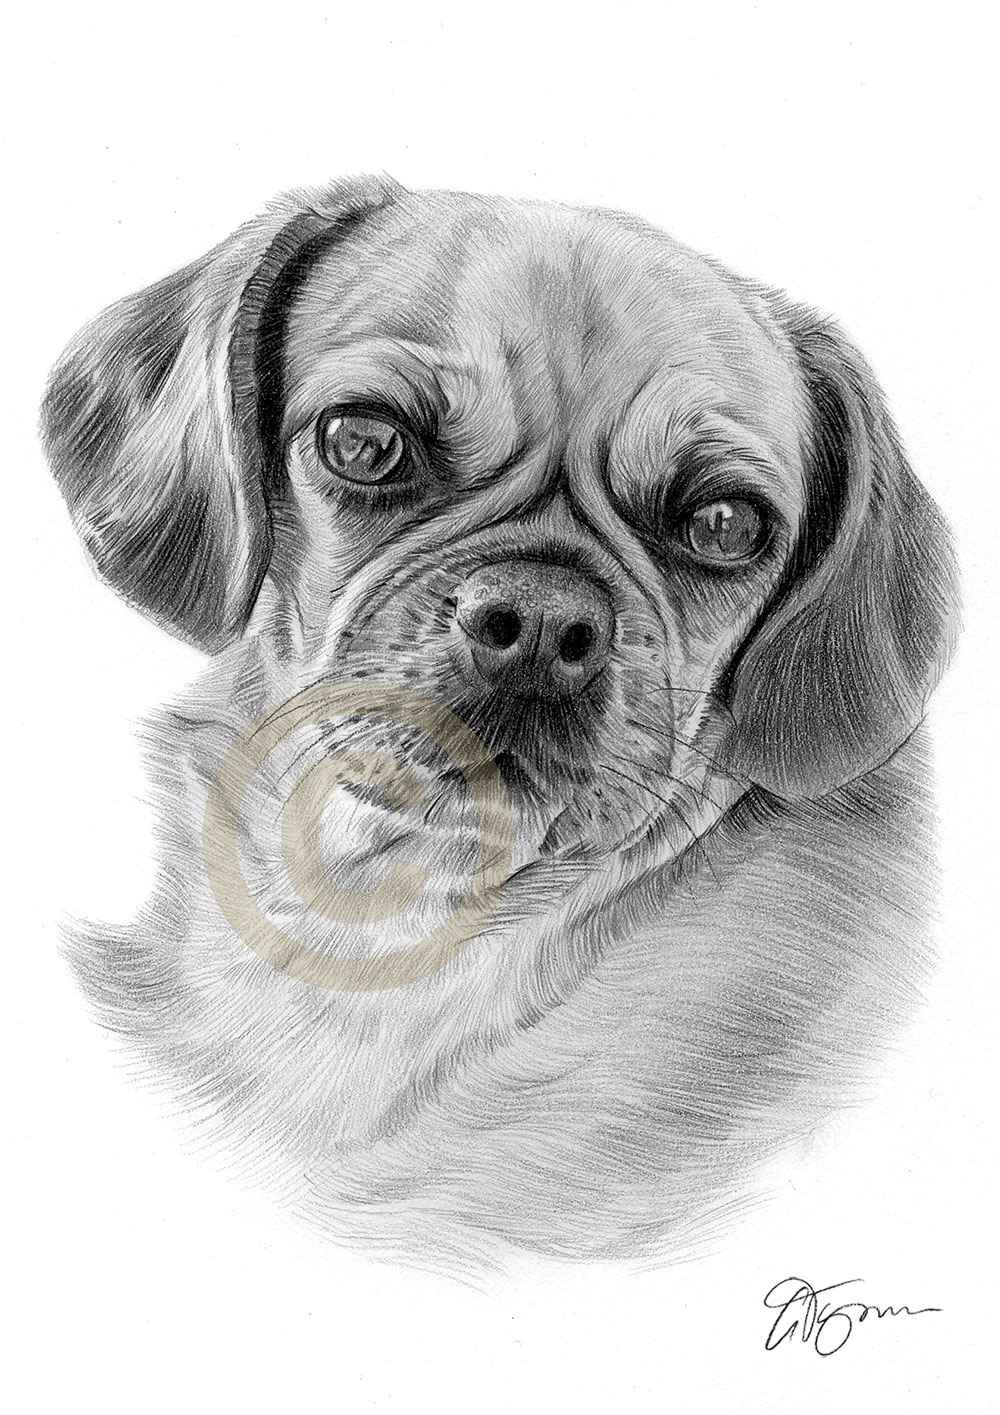 Pet portrait commission of a dog called Pea by artist Gary Tymon